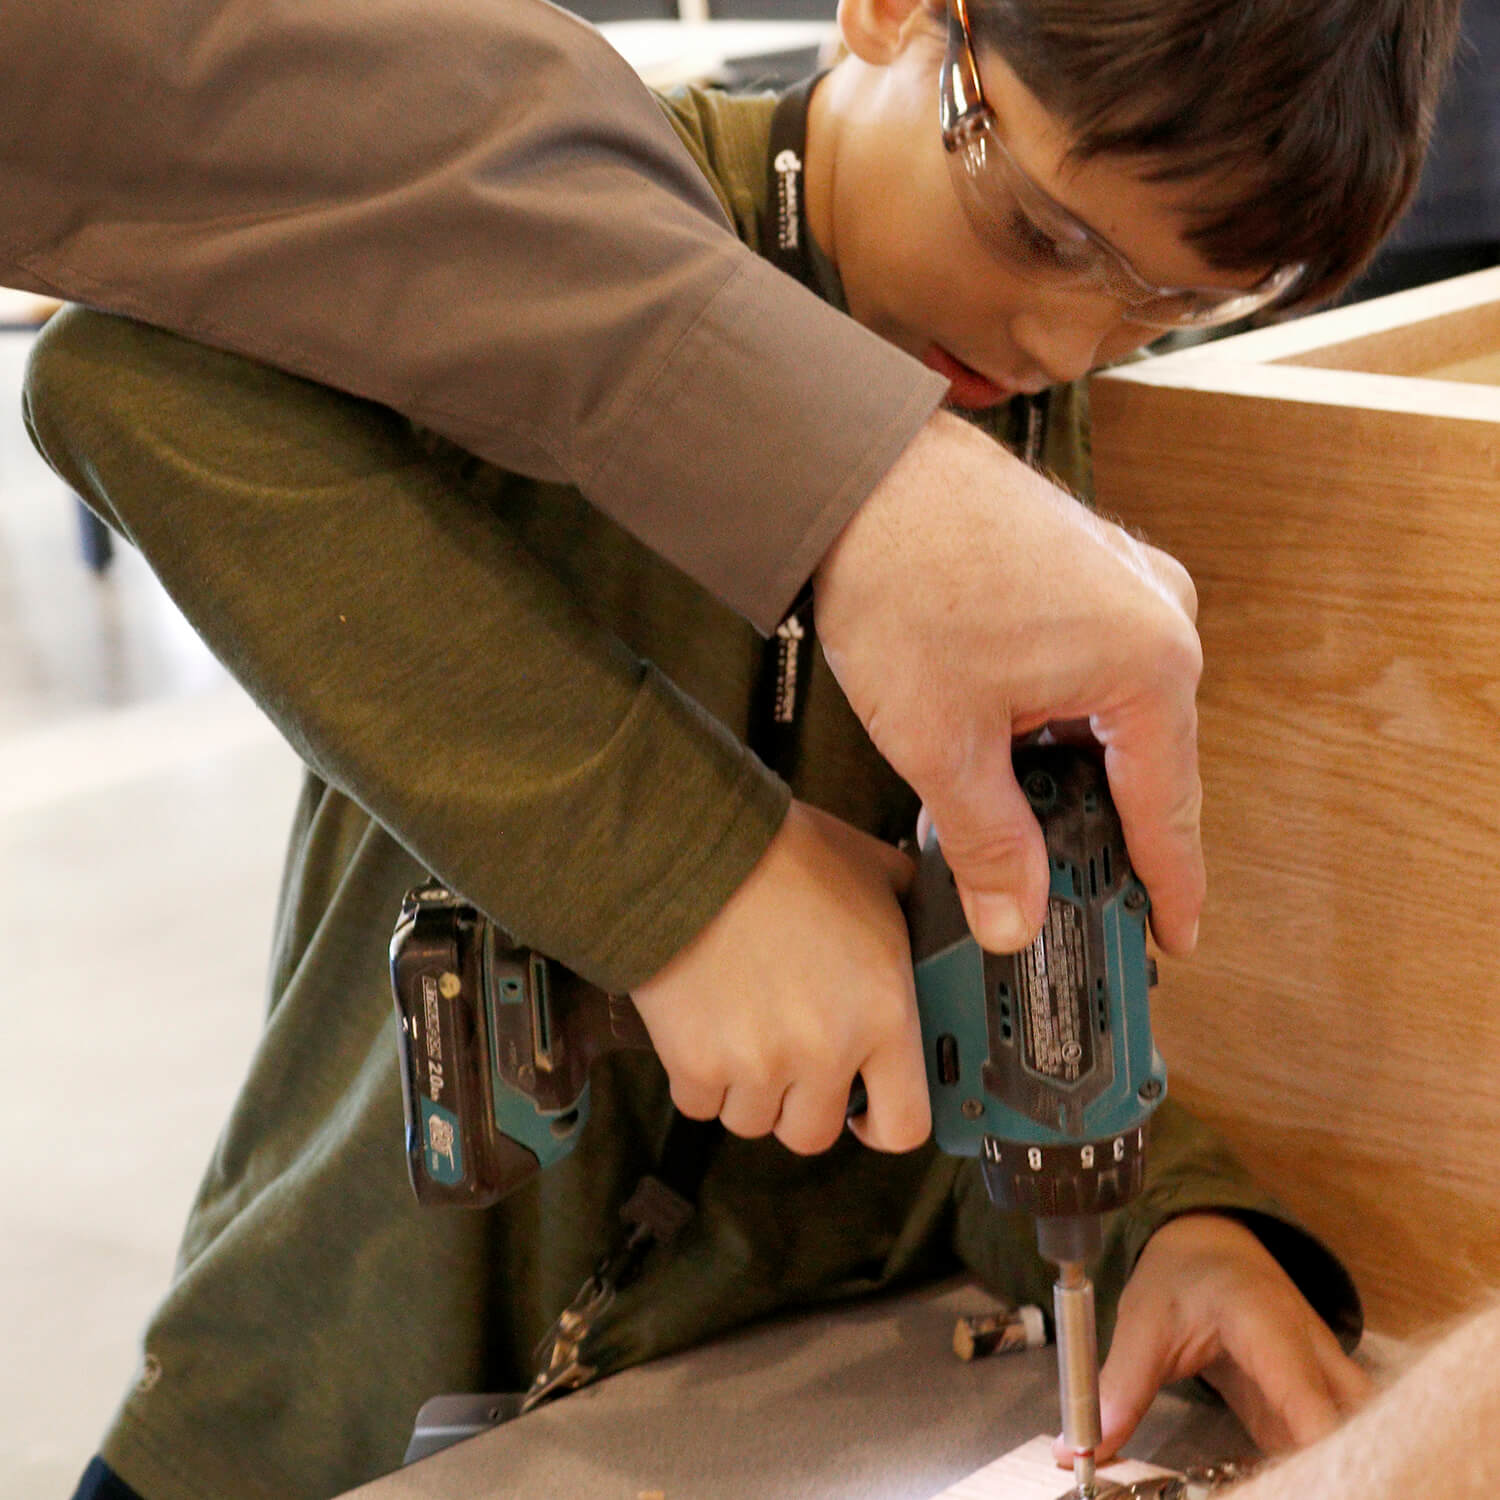 Student learning how to use a power drill to put on hinges of a cabinet.